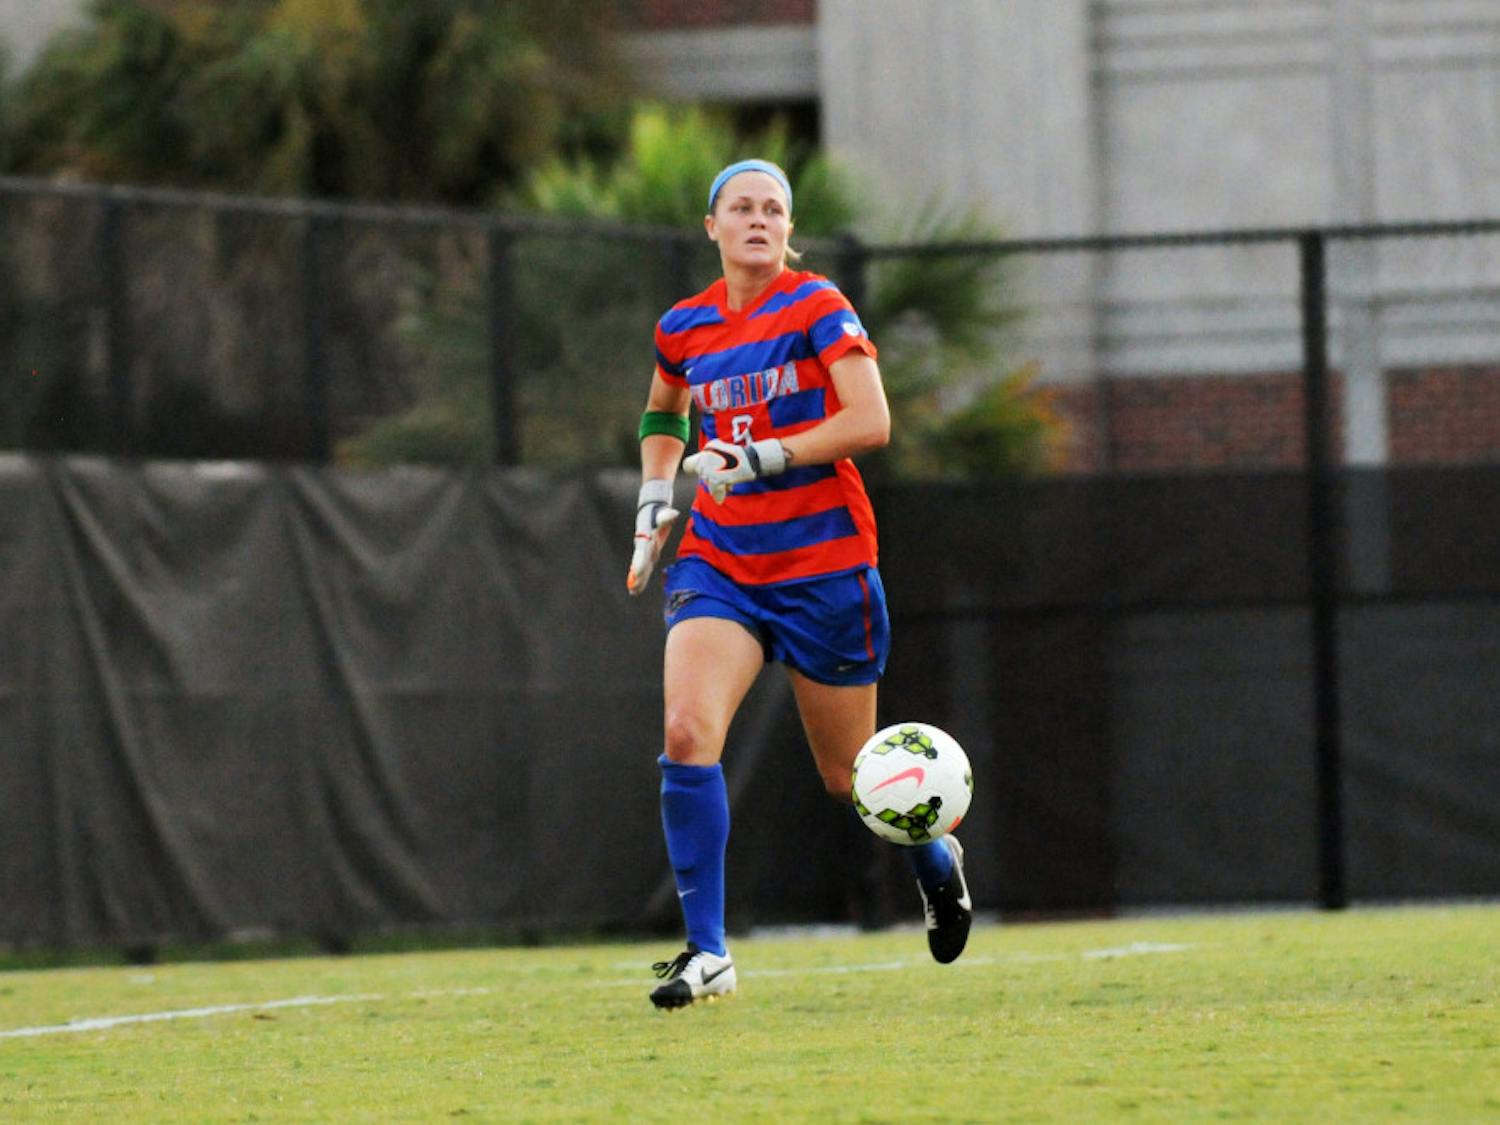 Goalkeeper Val Tysinger chases the ball during Florida's 2-1 win against Troy in an exhibition match on Aug. 11, 2015, at the soccer practice field at Donald R. Dizney Stadium.